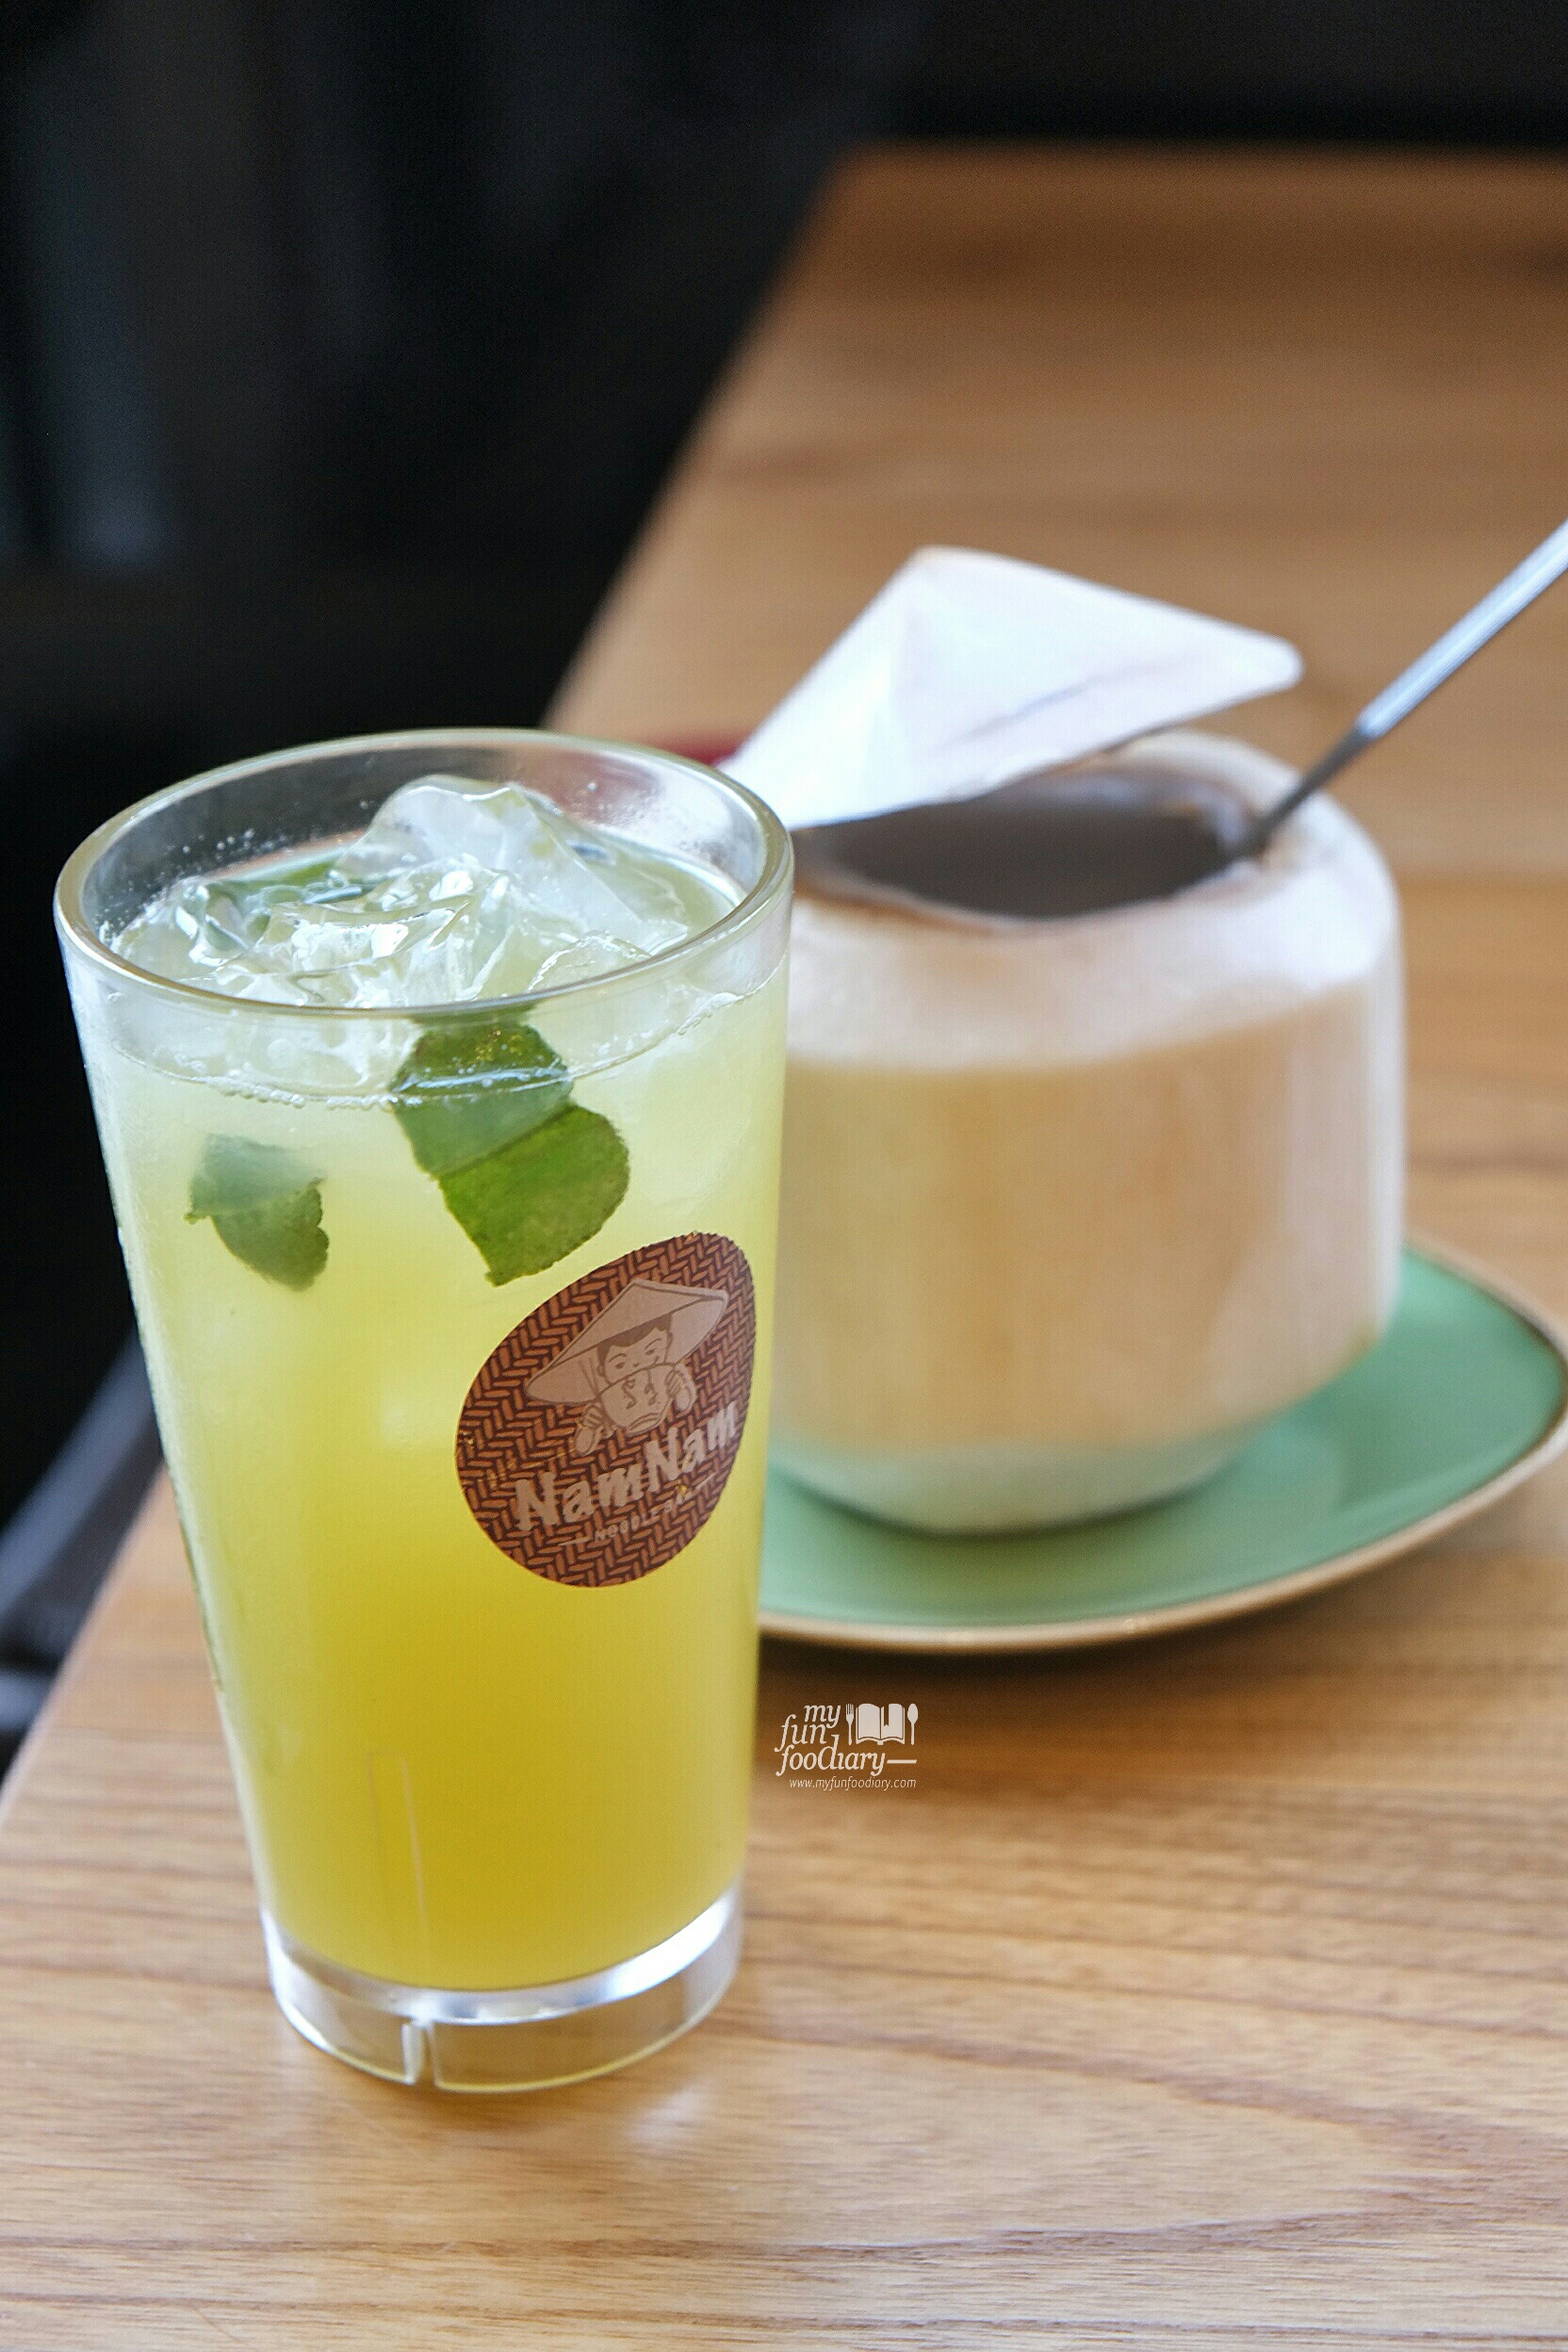 Sugarcane and Young Coconut at Nam Nam Noodle Bar by Myfunfoodiary.jpg